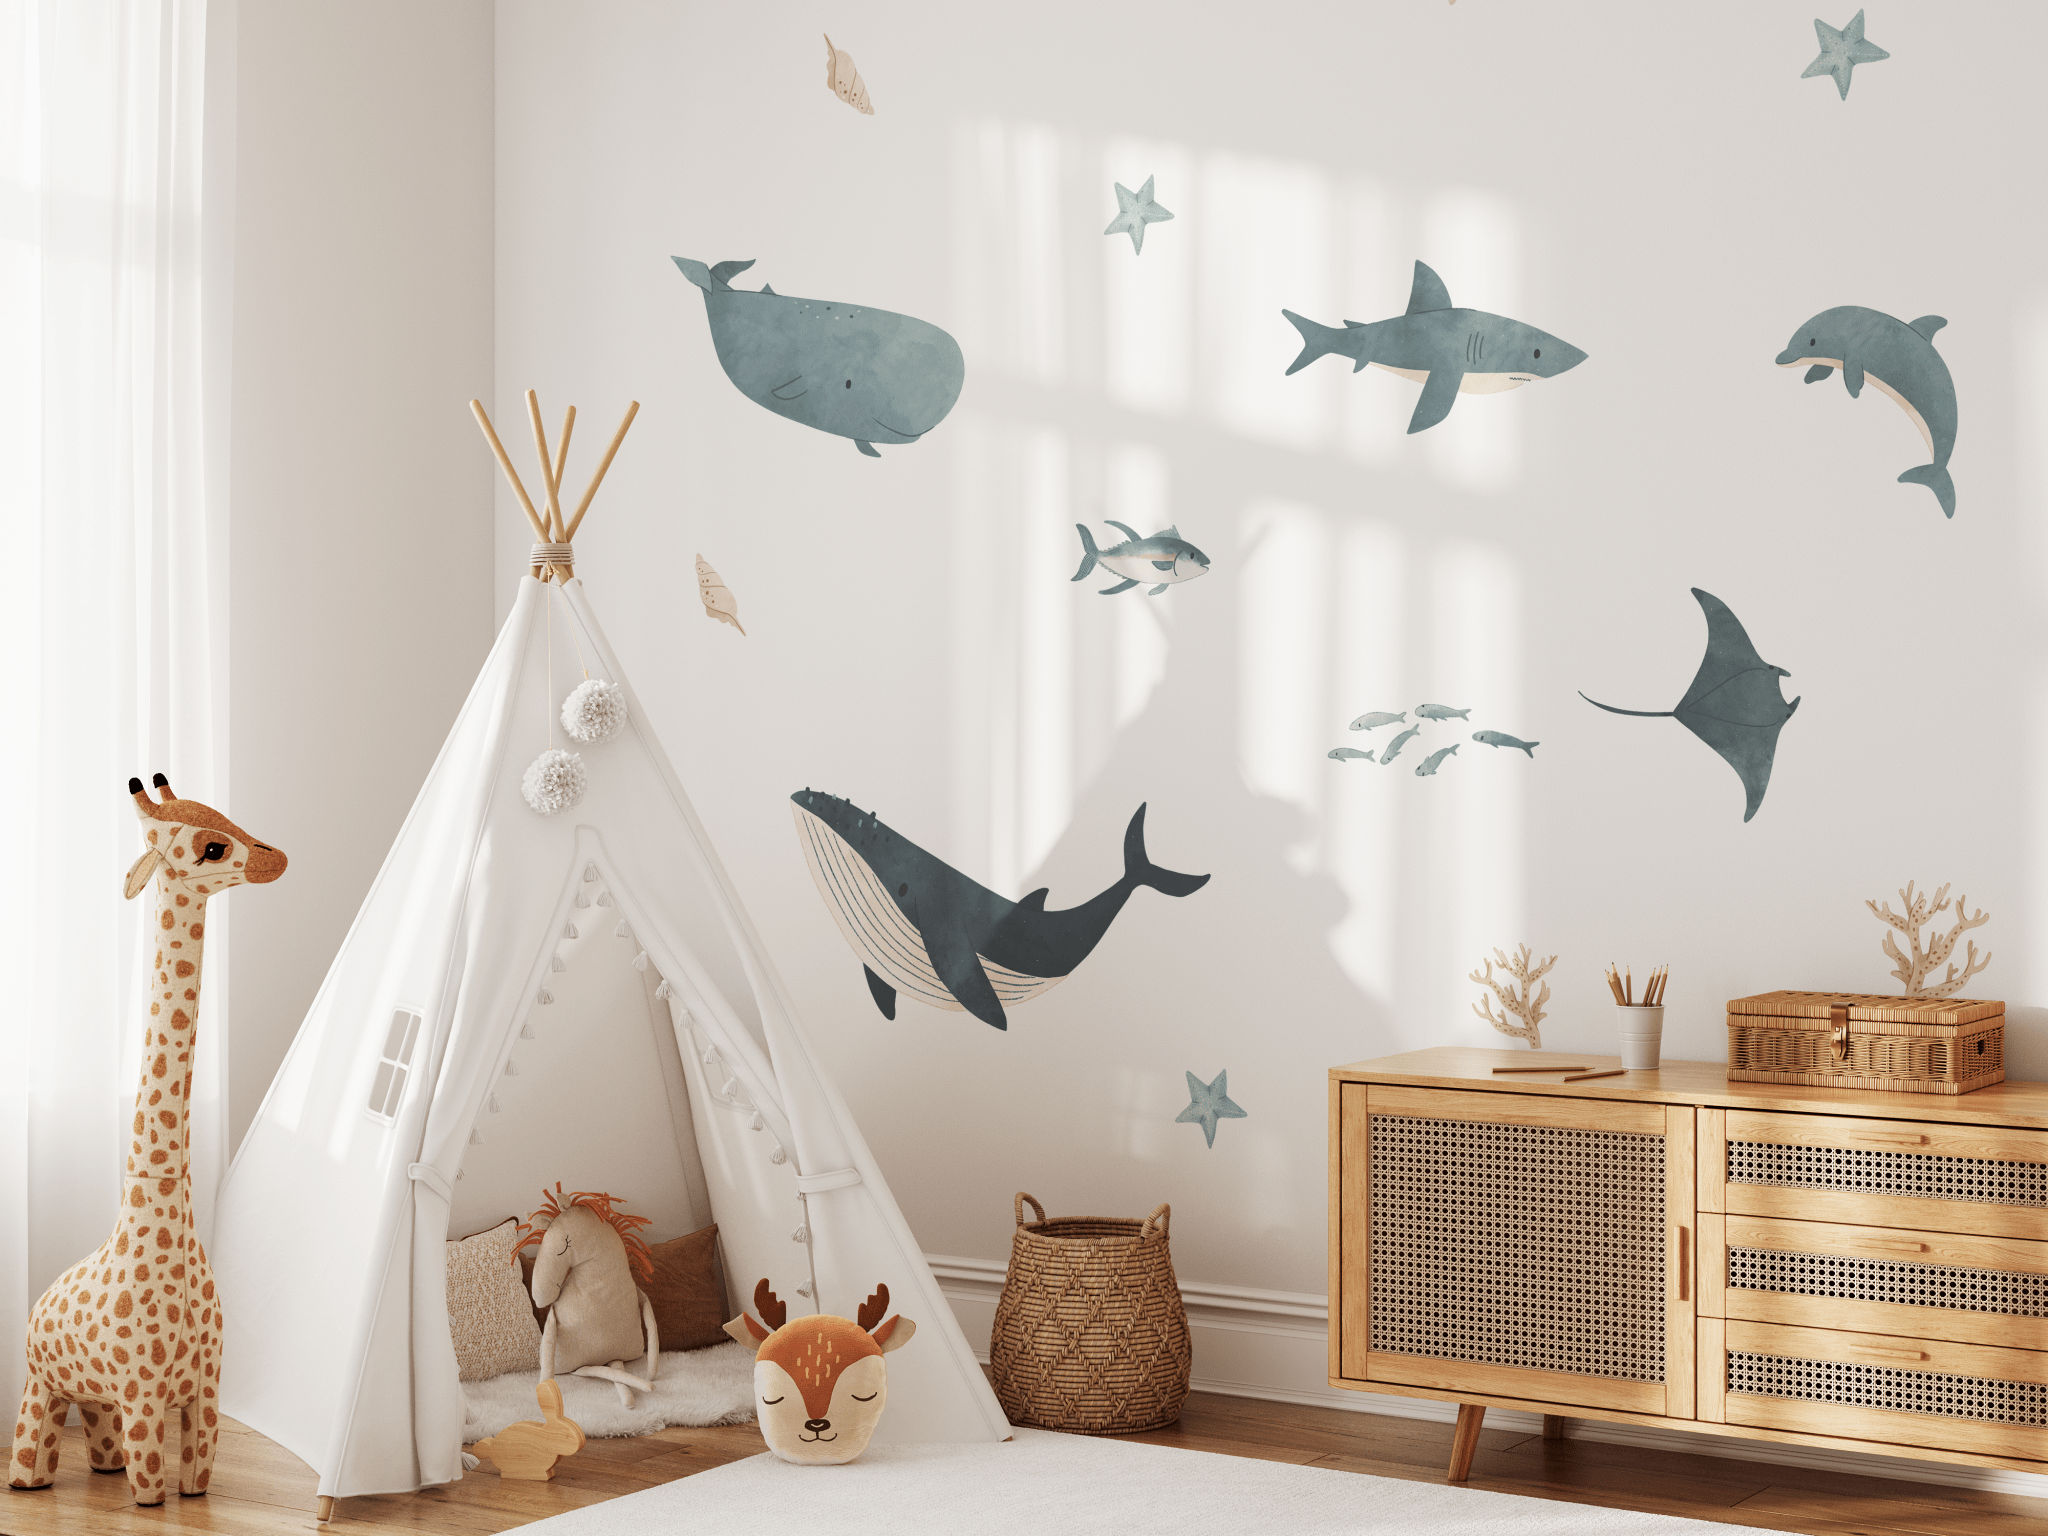 Bright, airy child's room with marine wall decals, a teepee play tent, and a tall plush giraffe next to a modern wooden dresser